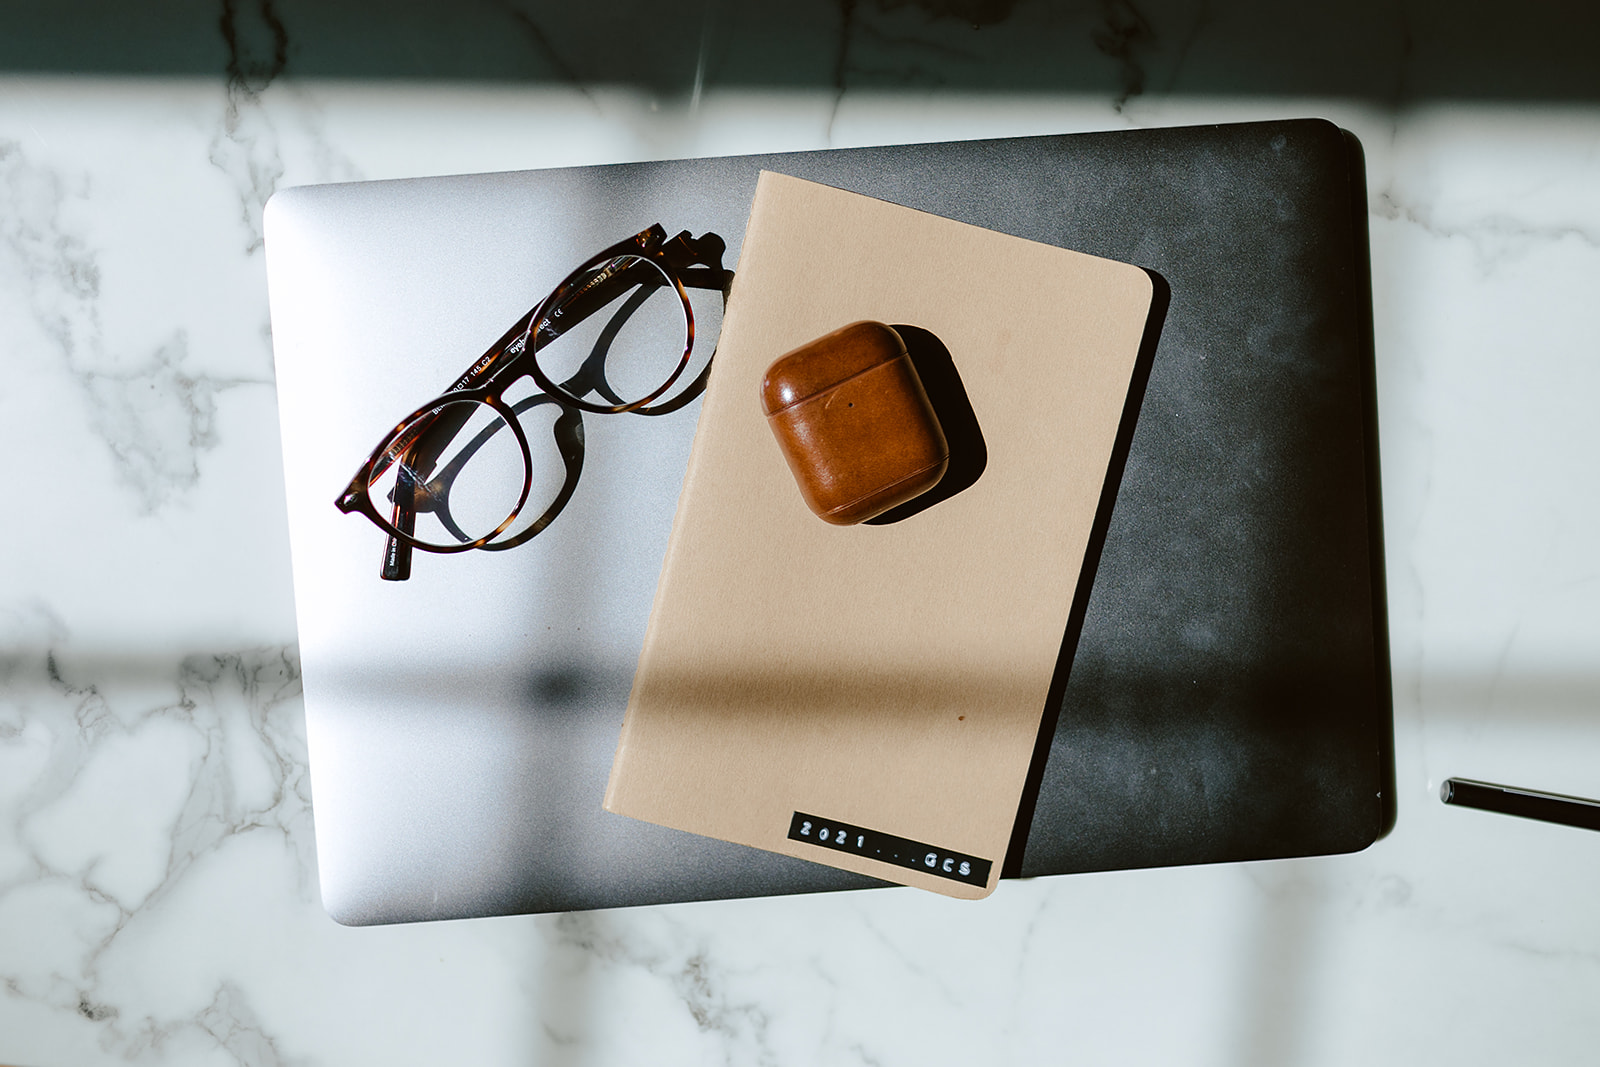 Closed laptop with notebook, glasses and airpods case on top, ready for a copywriter to open and write.